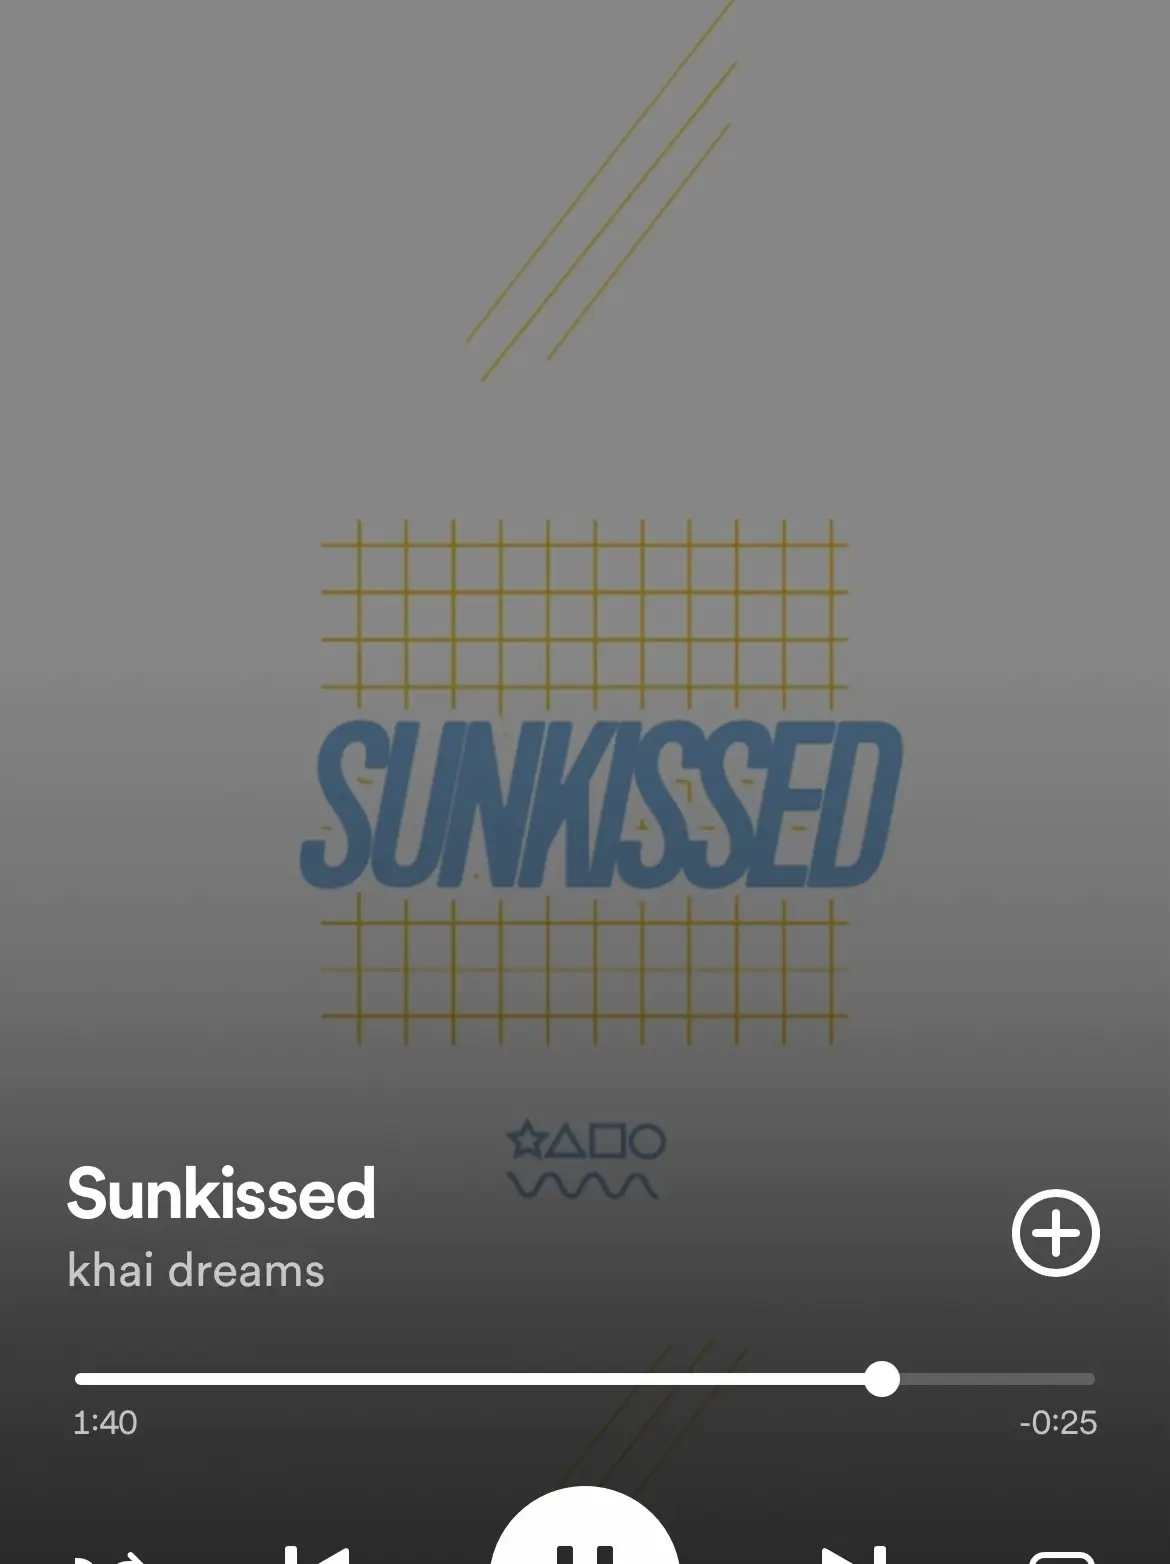  A song with a yellow background and a white background with the words "sunkissed" written on it.